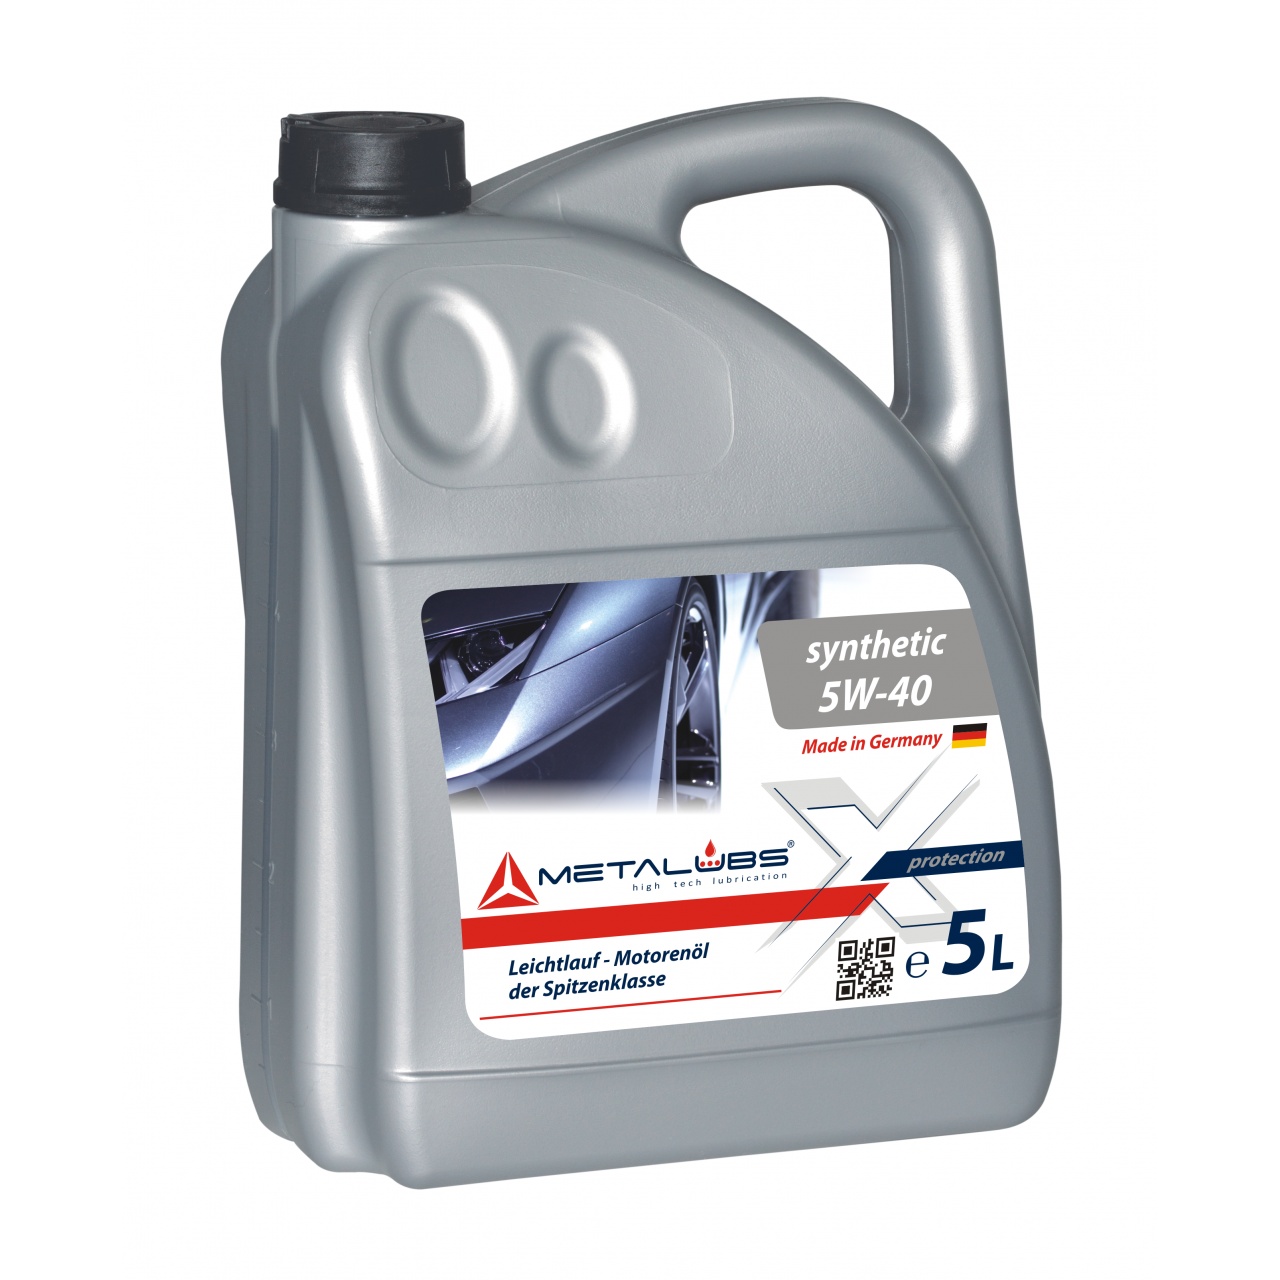 Metalubs Synthetic Oil 5W-40 5l